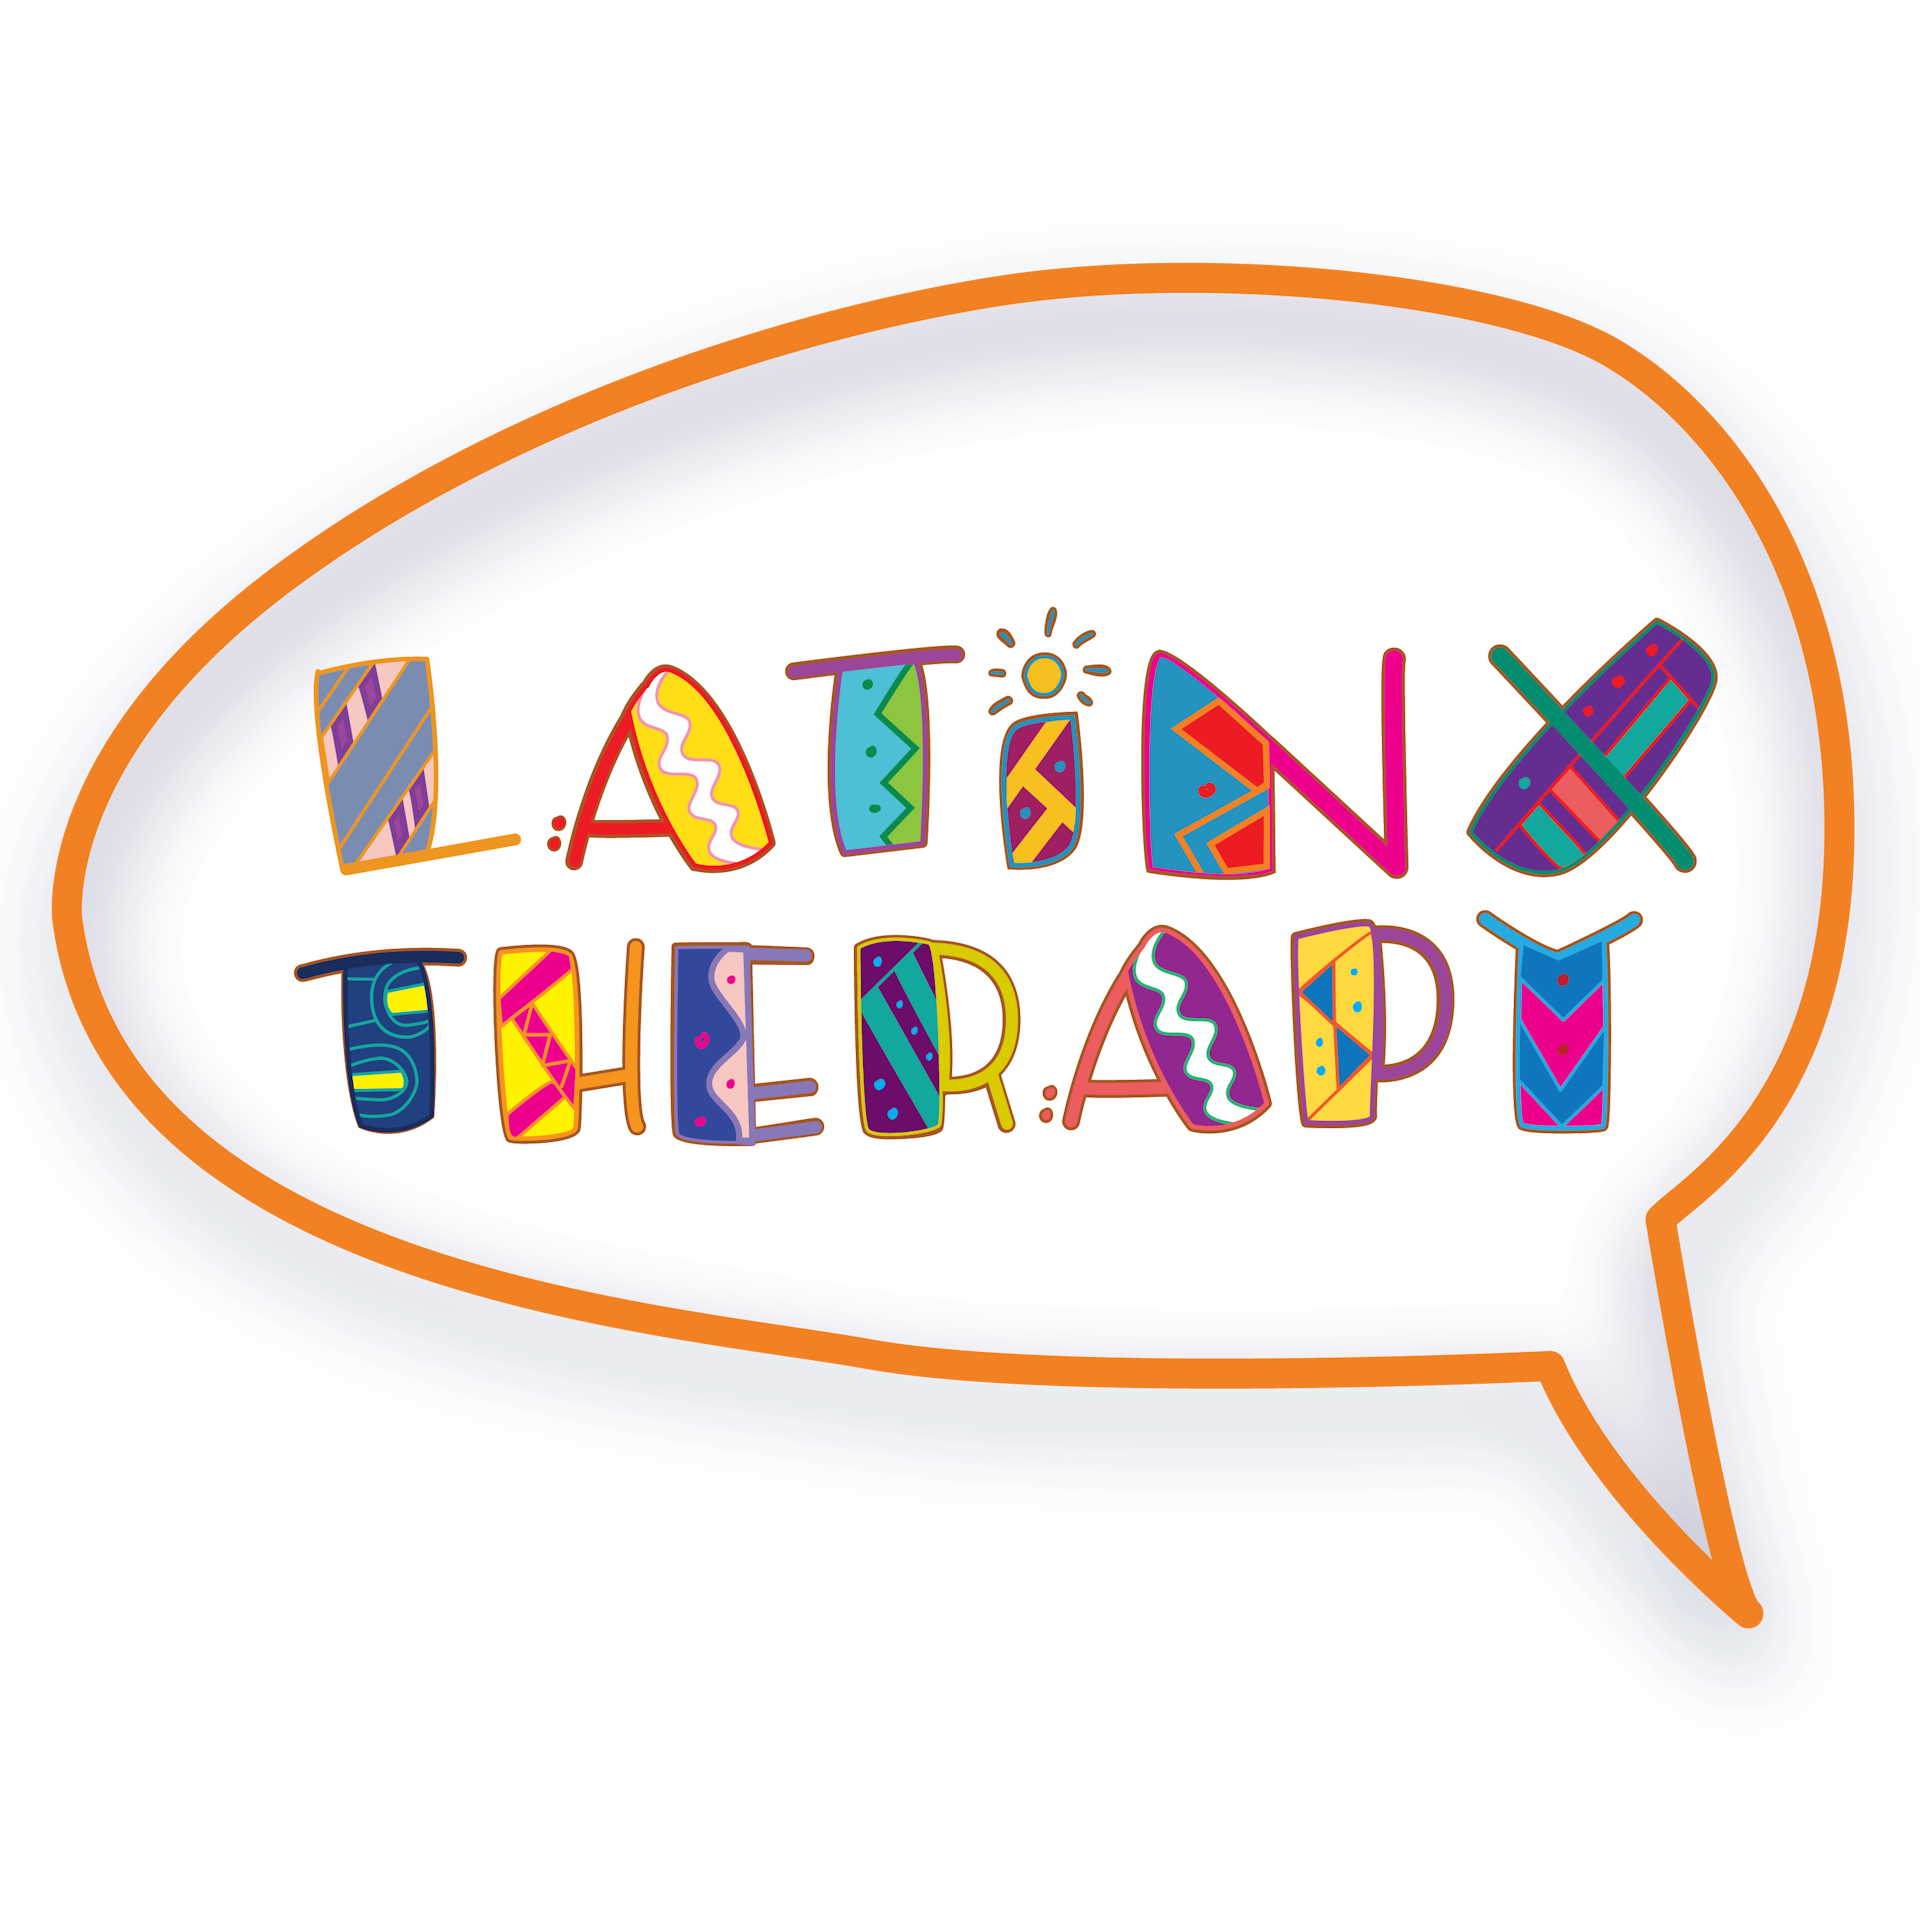 Latinx Therapy